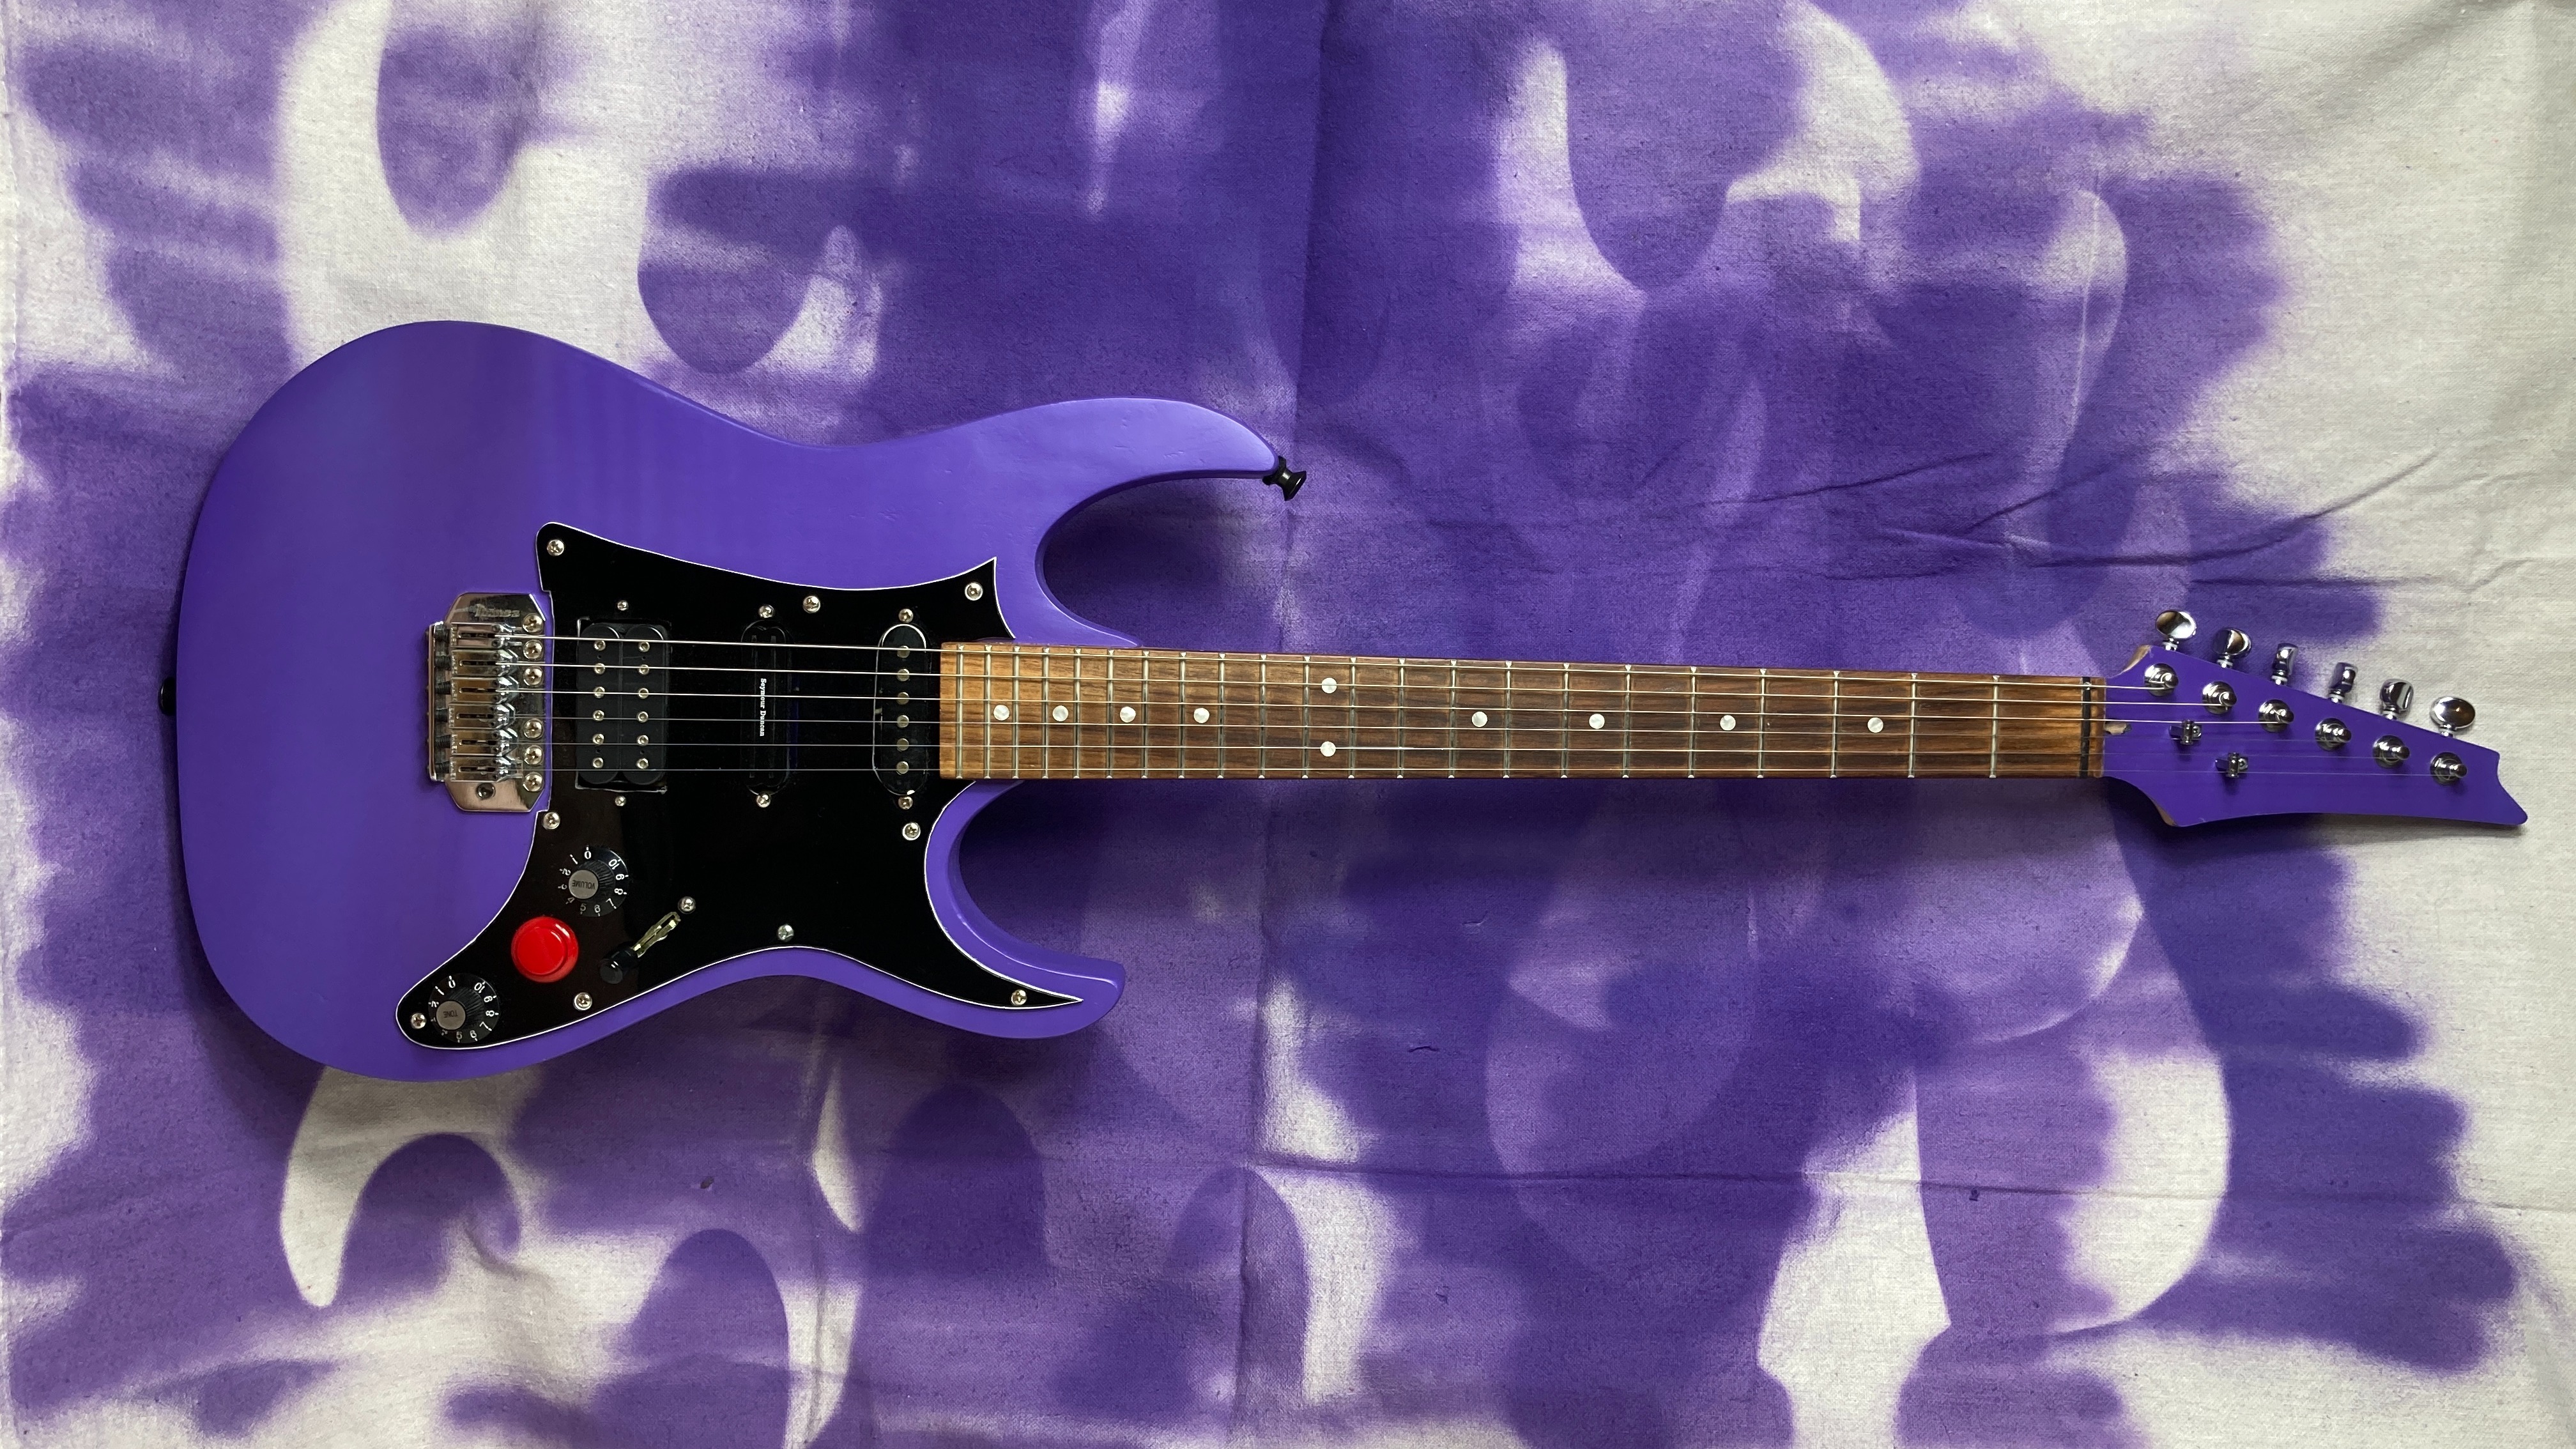 My newly painted purple guitar resting on the canvas cloth I painted it on. It shows a few outlines of my guitar and looks cool.